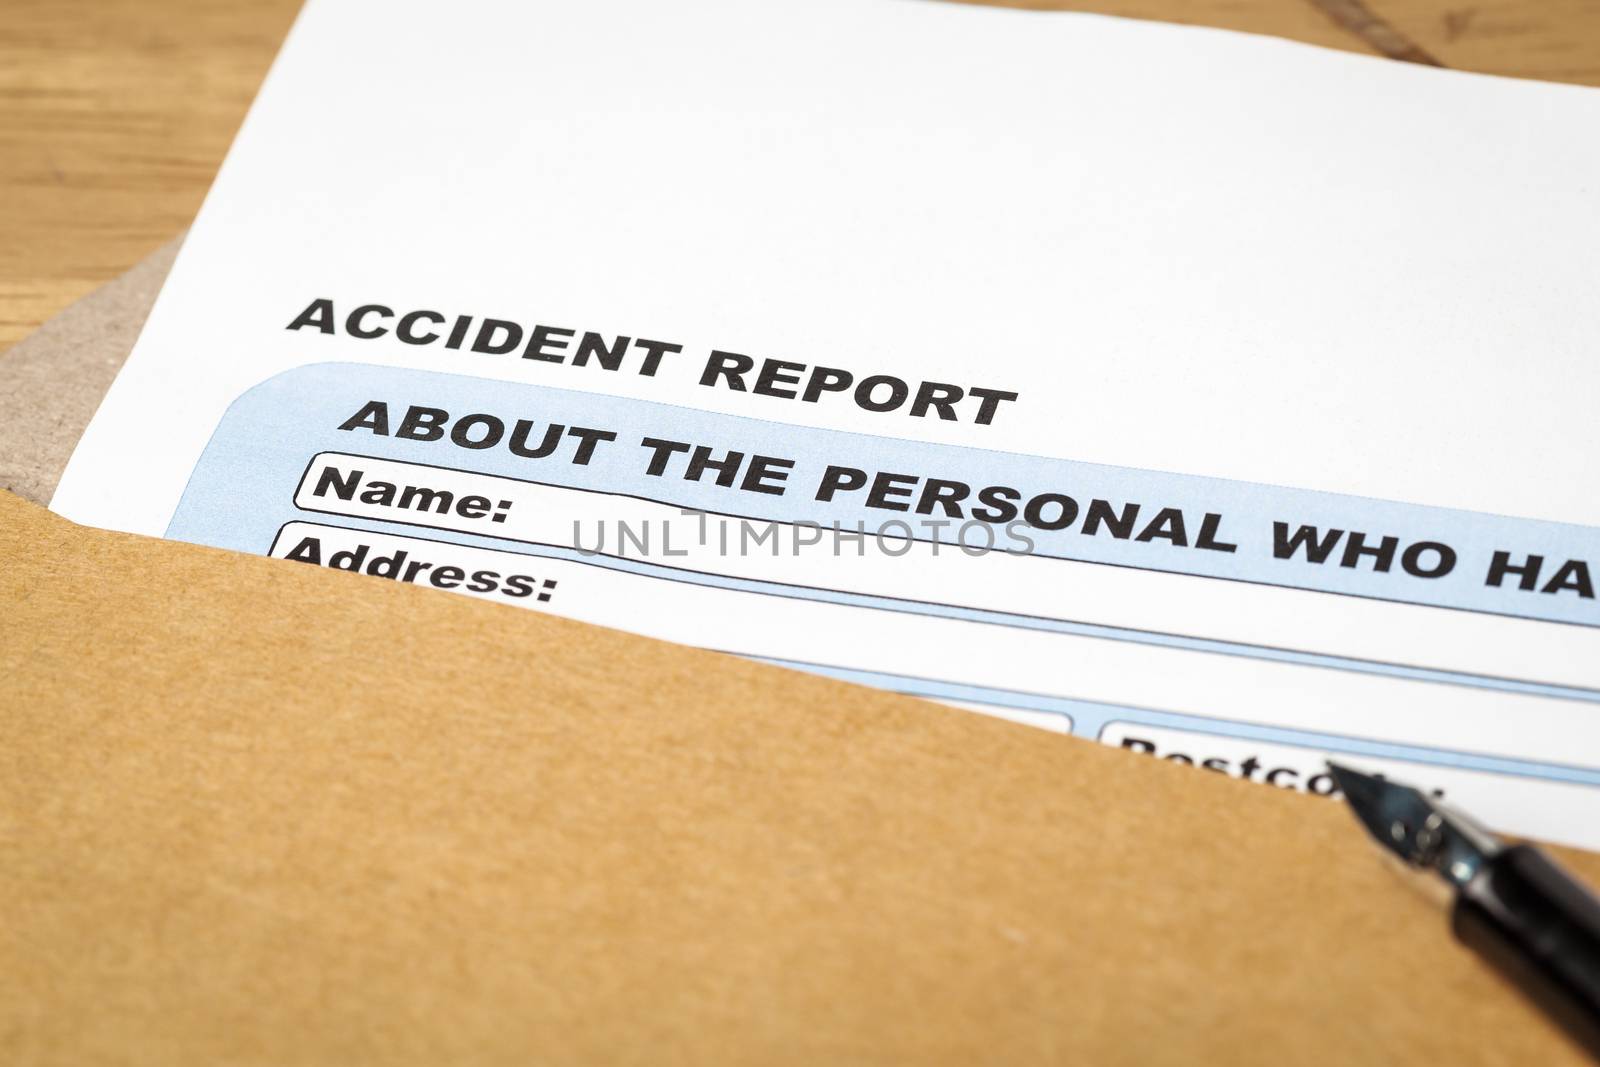 Accident report application form and pen on brown envelope, business insurance and risk concept; document is mock-up